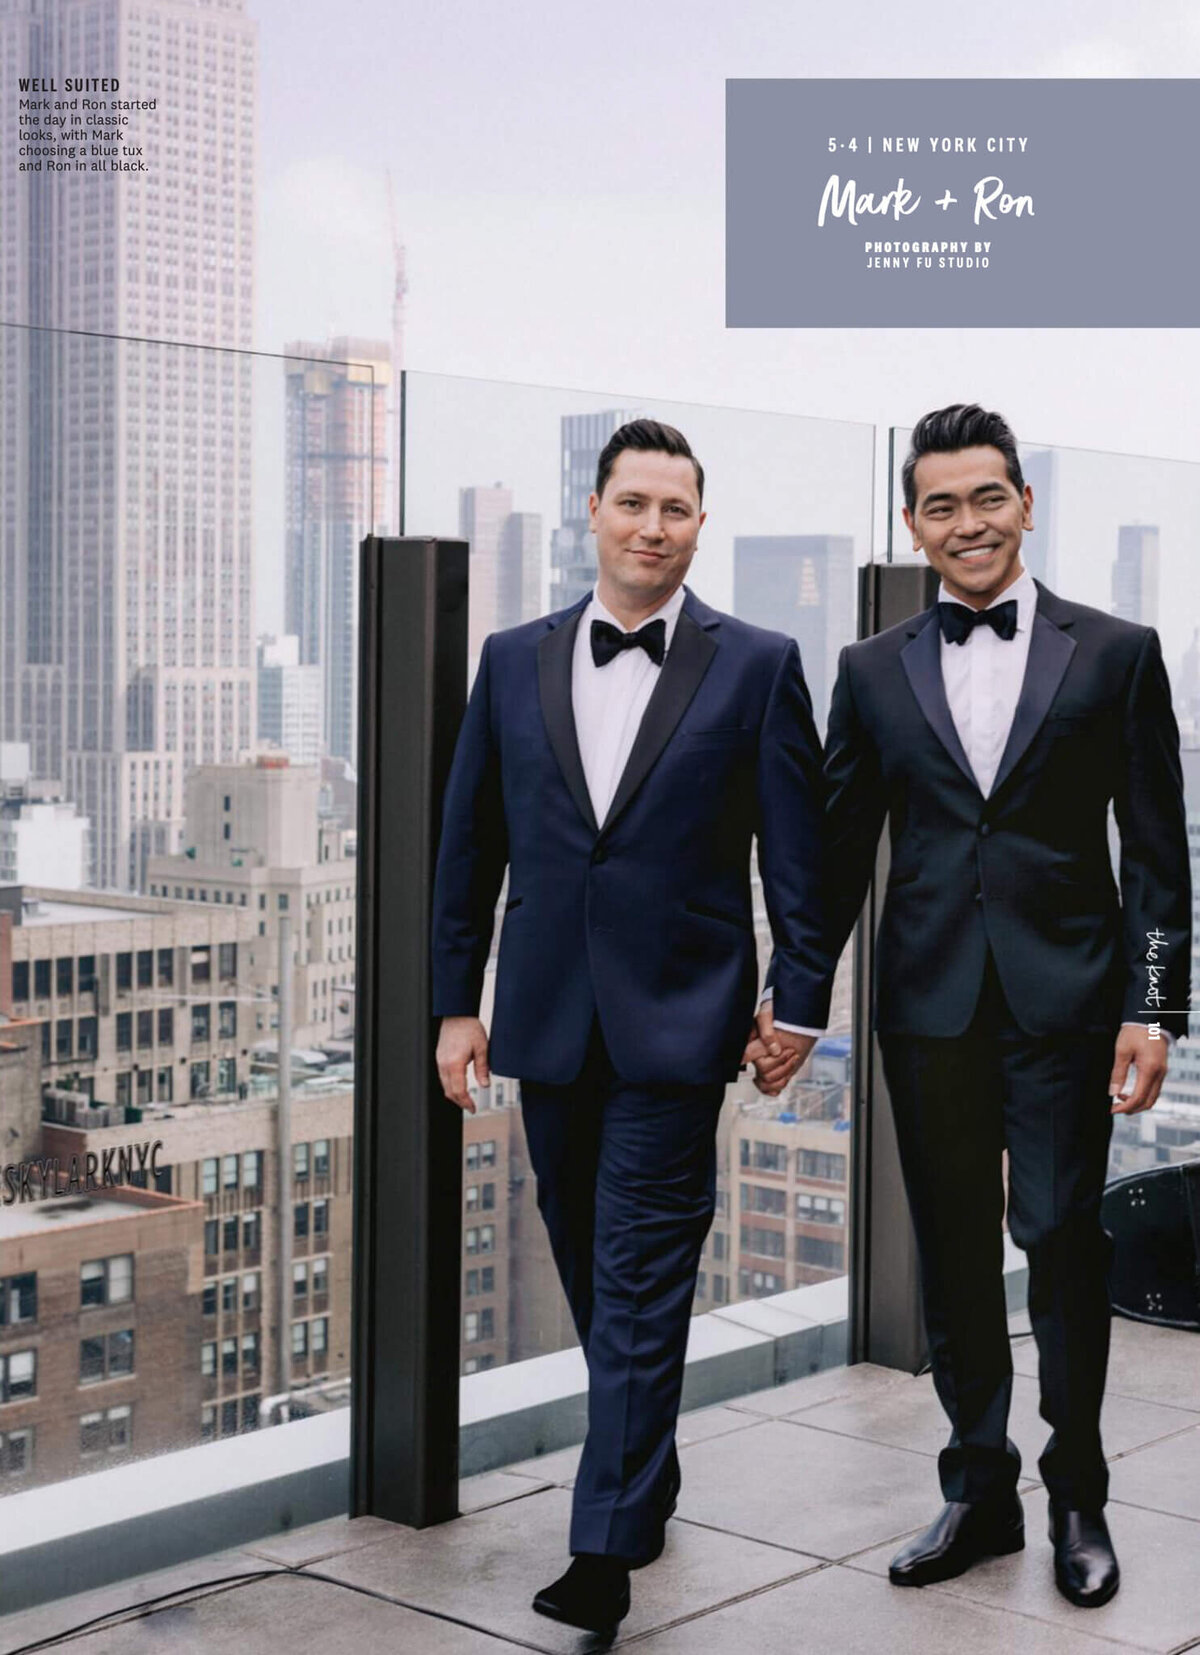 A page in The Knot Magazine where there's an image of two grooms with a background of skyscrapers. Image by Jenny Fu Studio